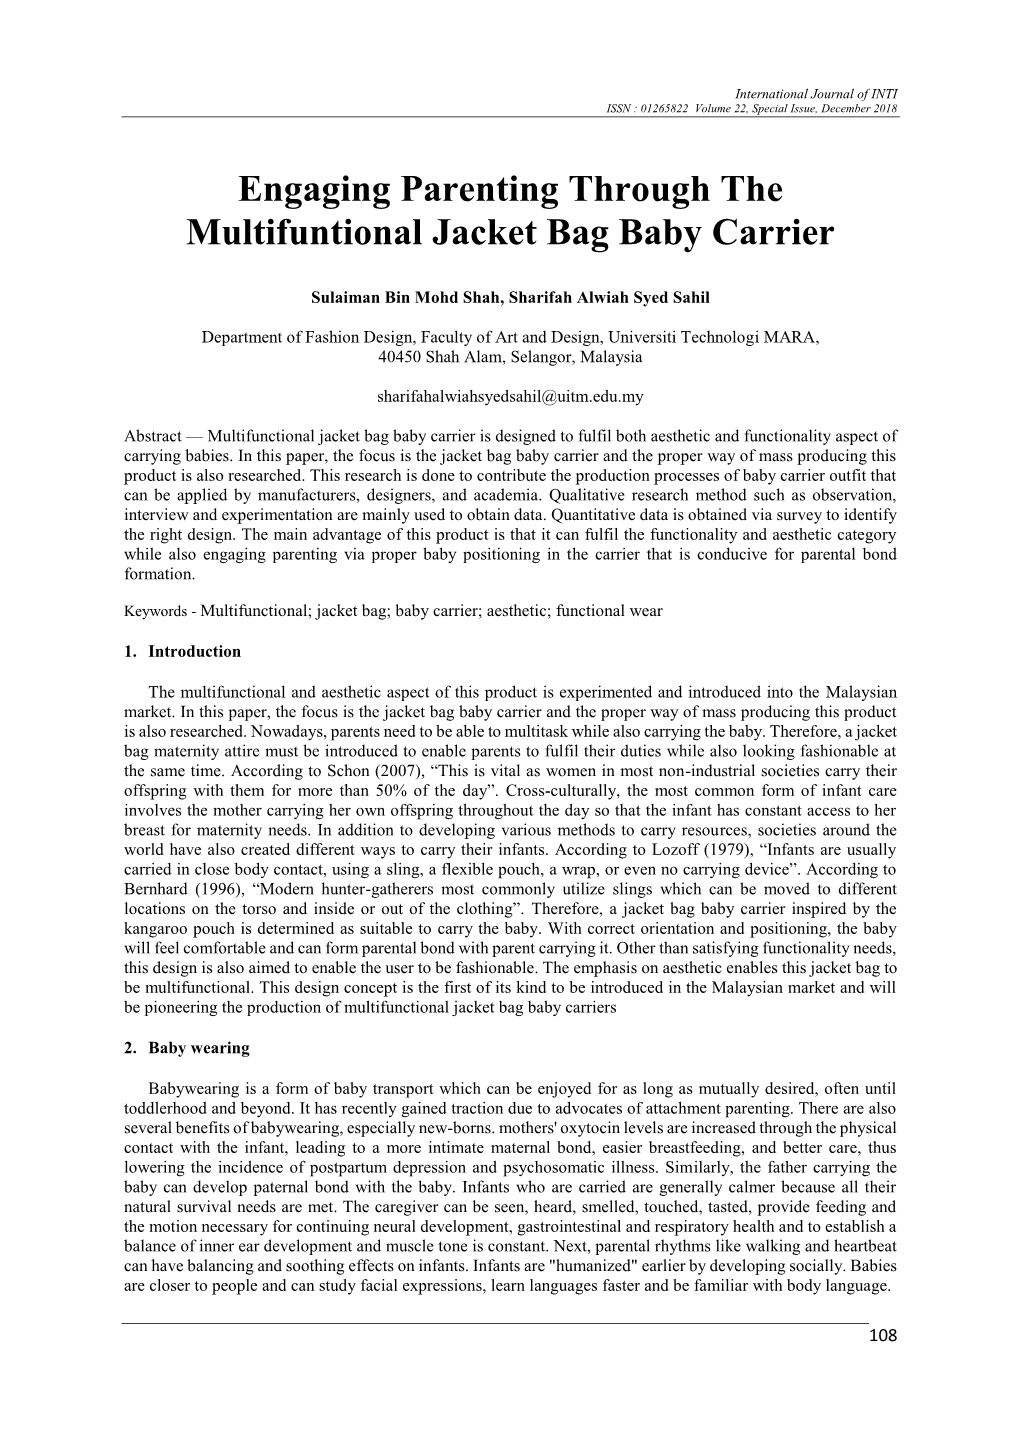 Engaging Parenting Through the Multifuntional Jacket Bag Baby Carrier